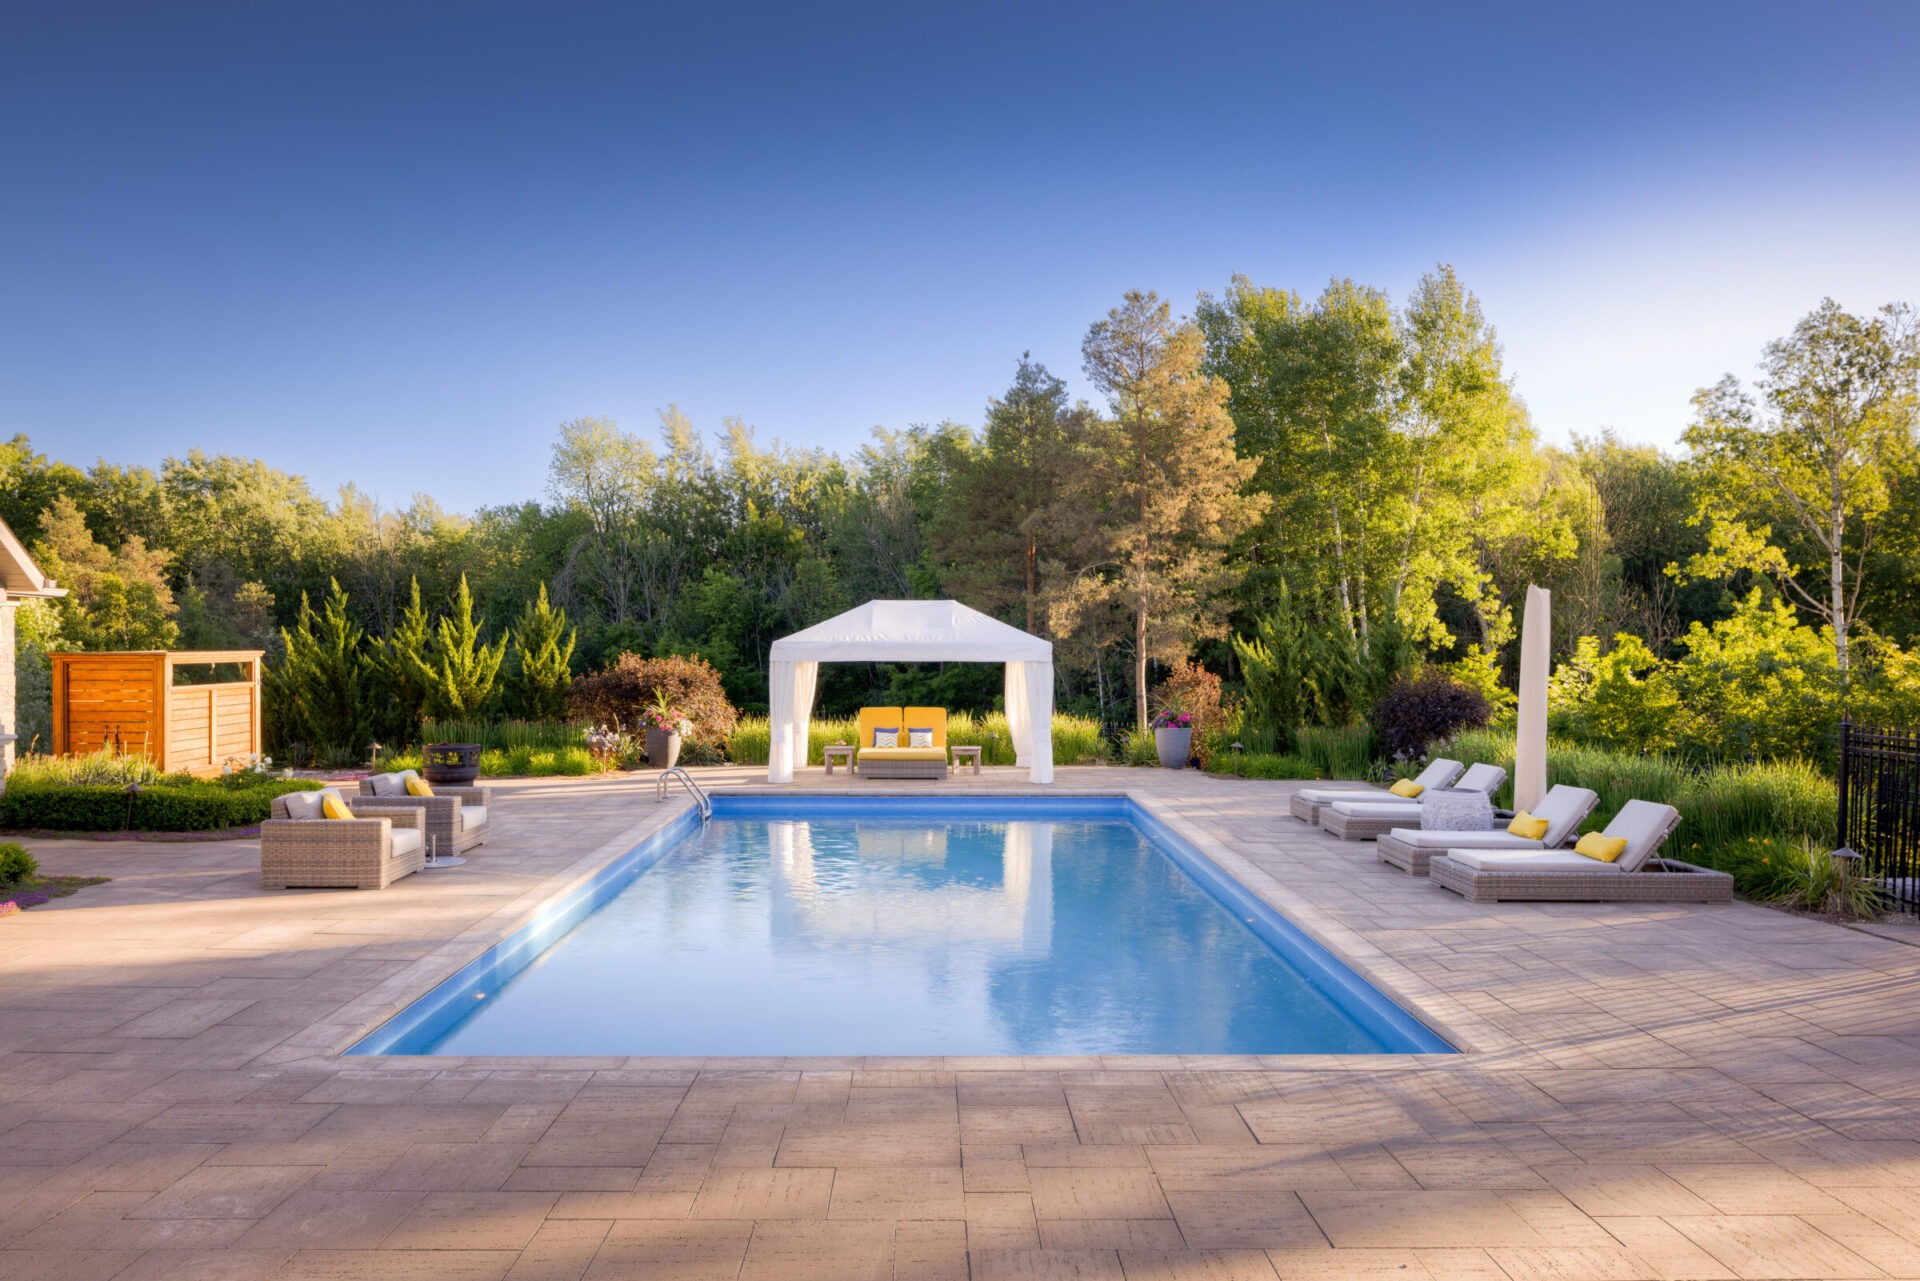 This image features an outdoor swimming pool with clear blue water, flanked by lounge chairs and a gazebo, set against a backdrop of lush greenery.